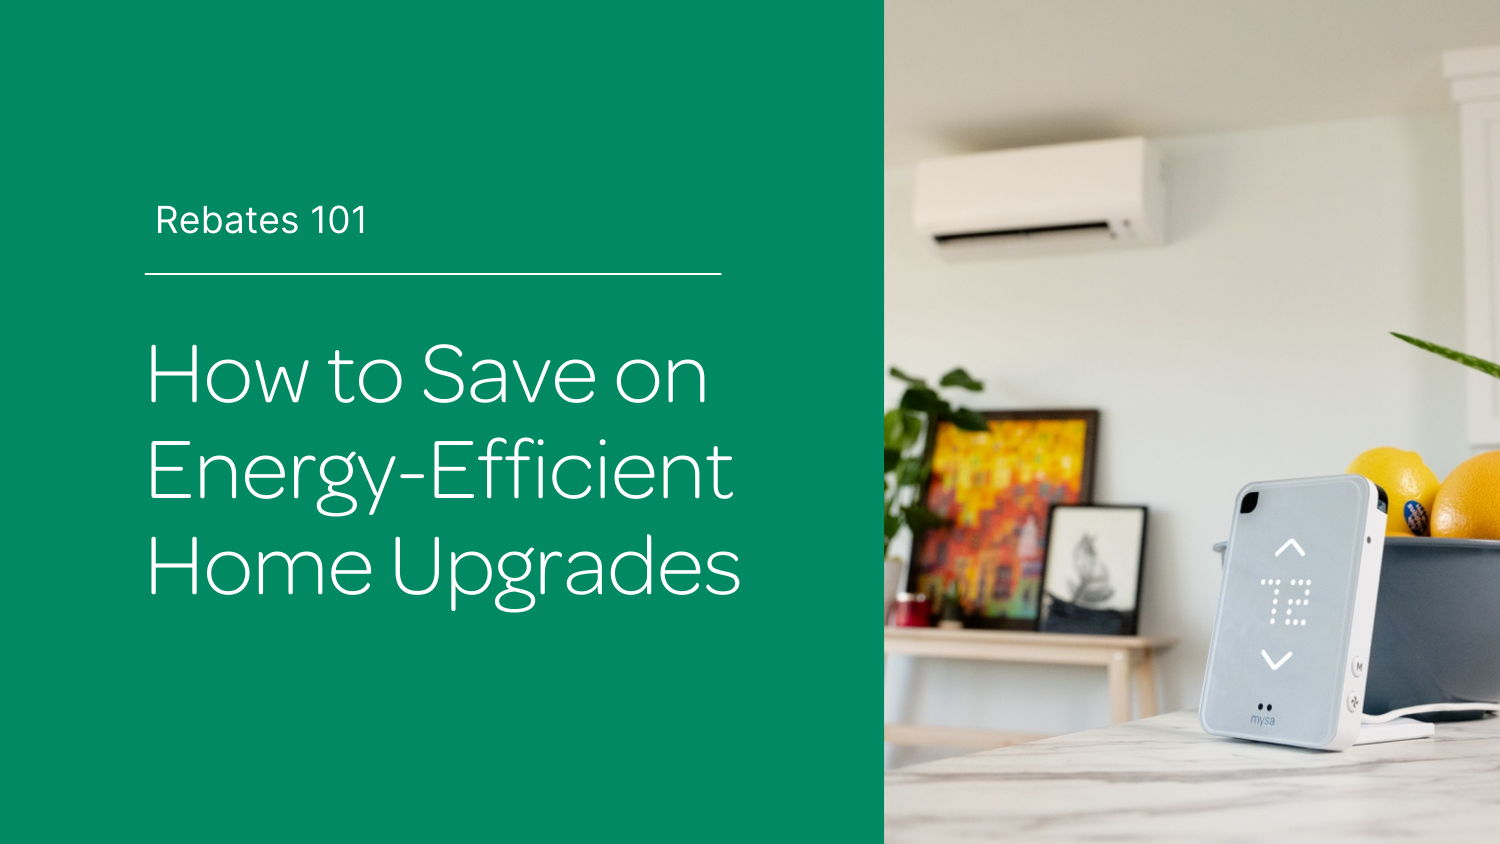 rebates-101-how-to-save-on-energy-efficient-home-upgrades-energy